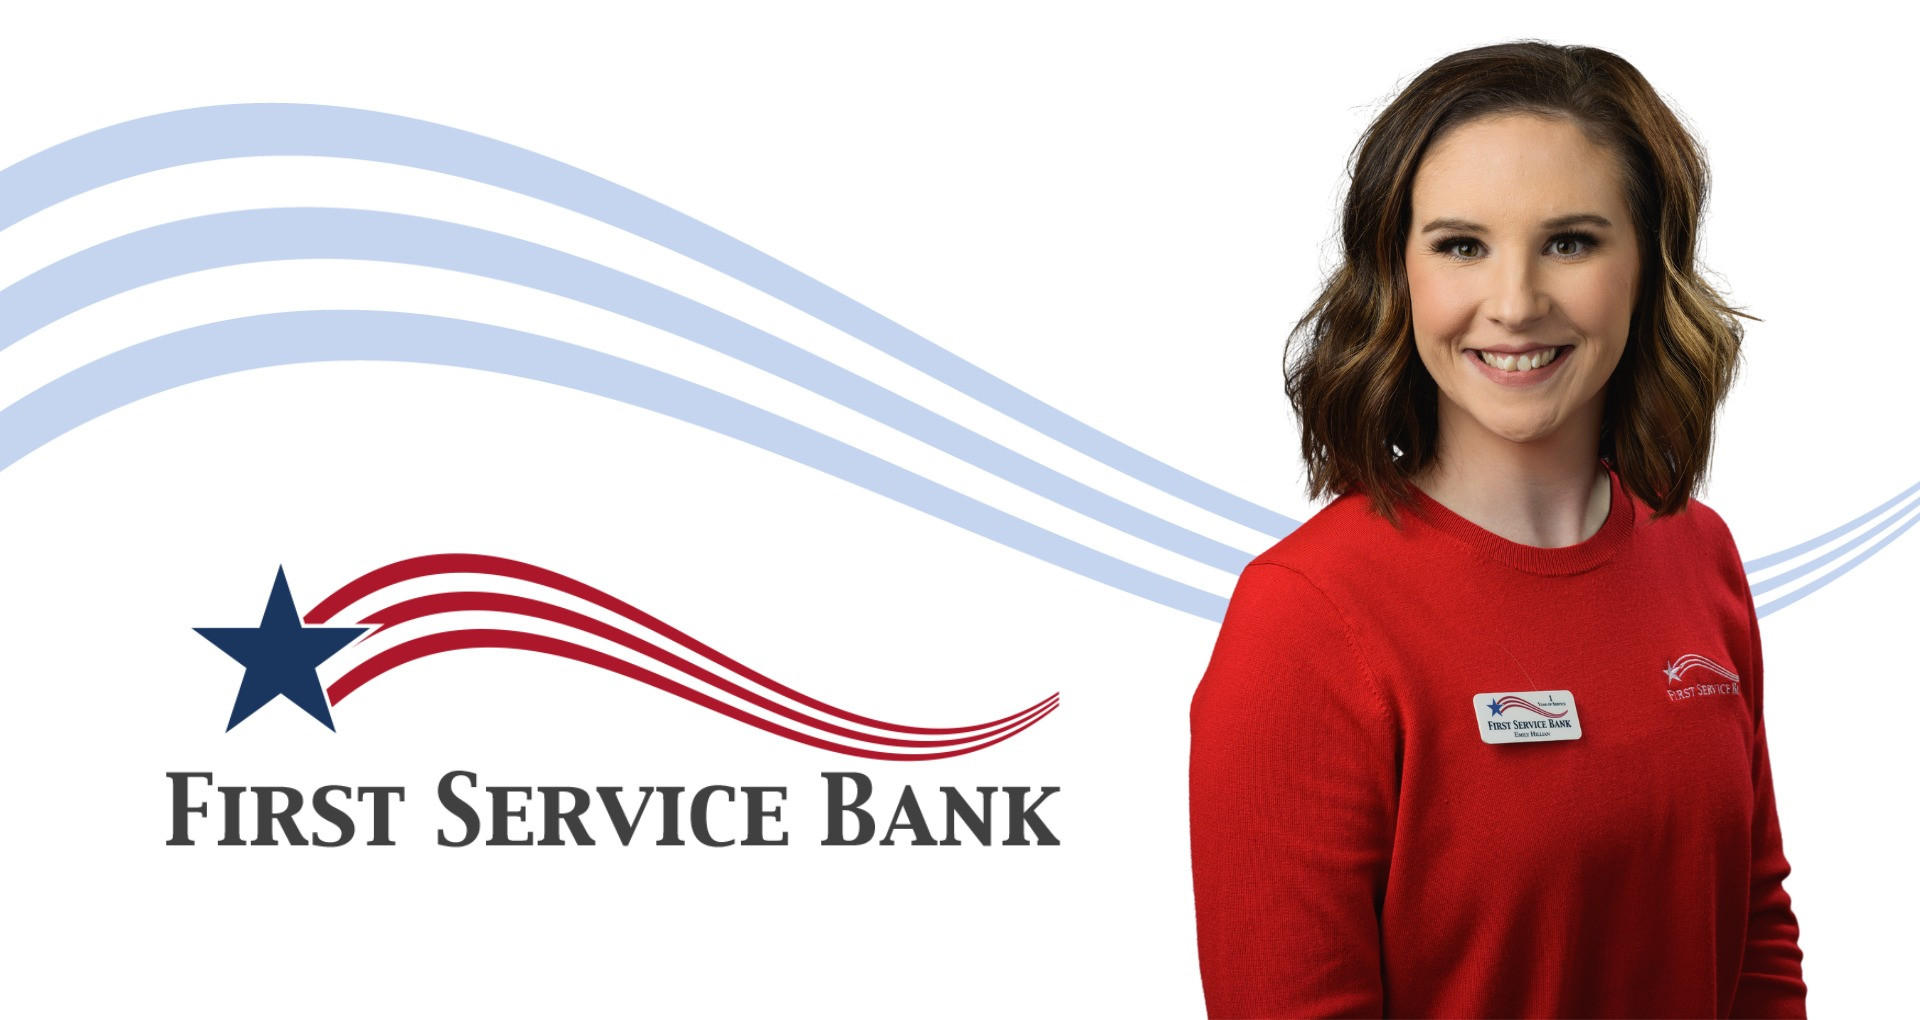 Emily Hillian Returns to First Service Bank as New Commercial Loan Officer and Business Development Officer